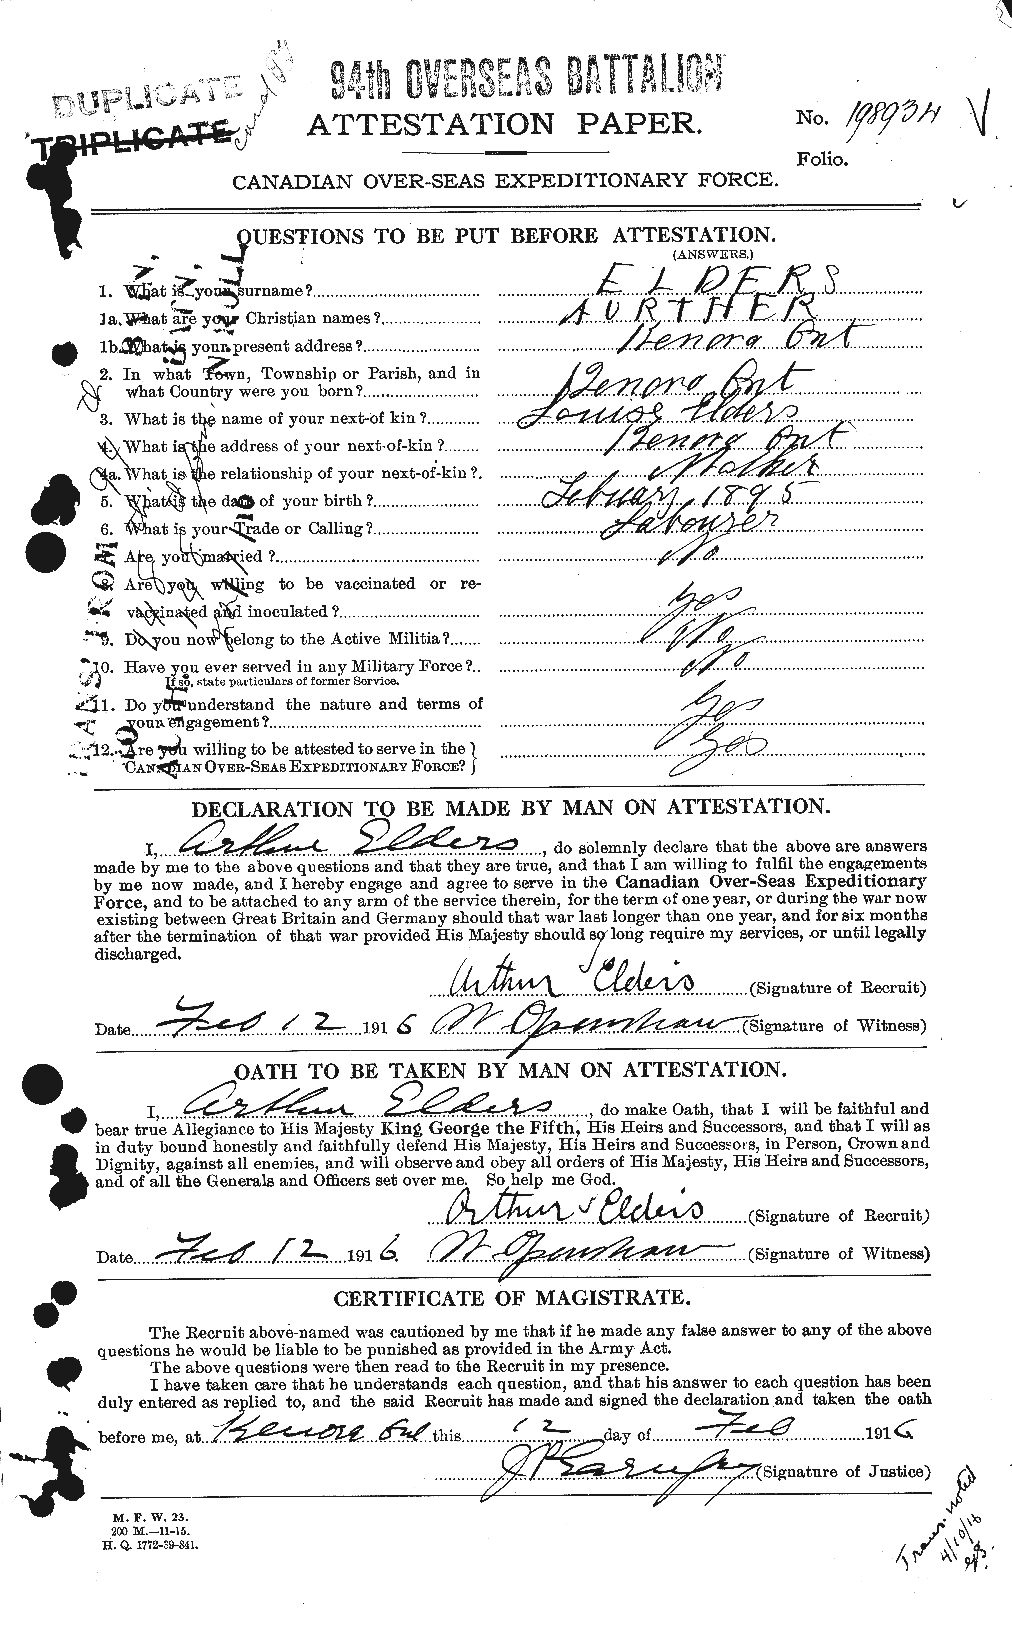 Personnel Records of the First World War - CEF 312394a